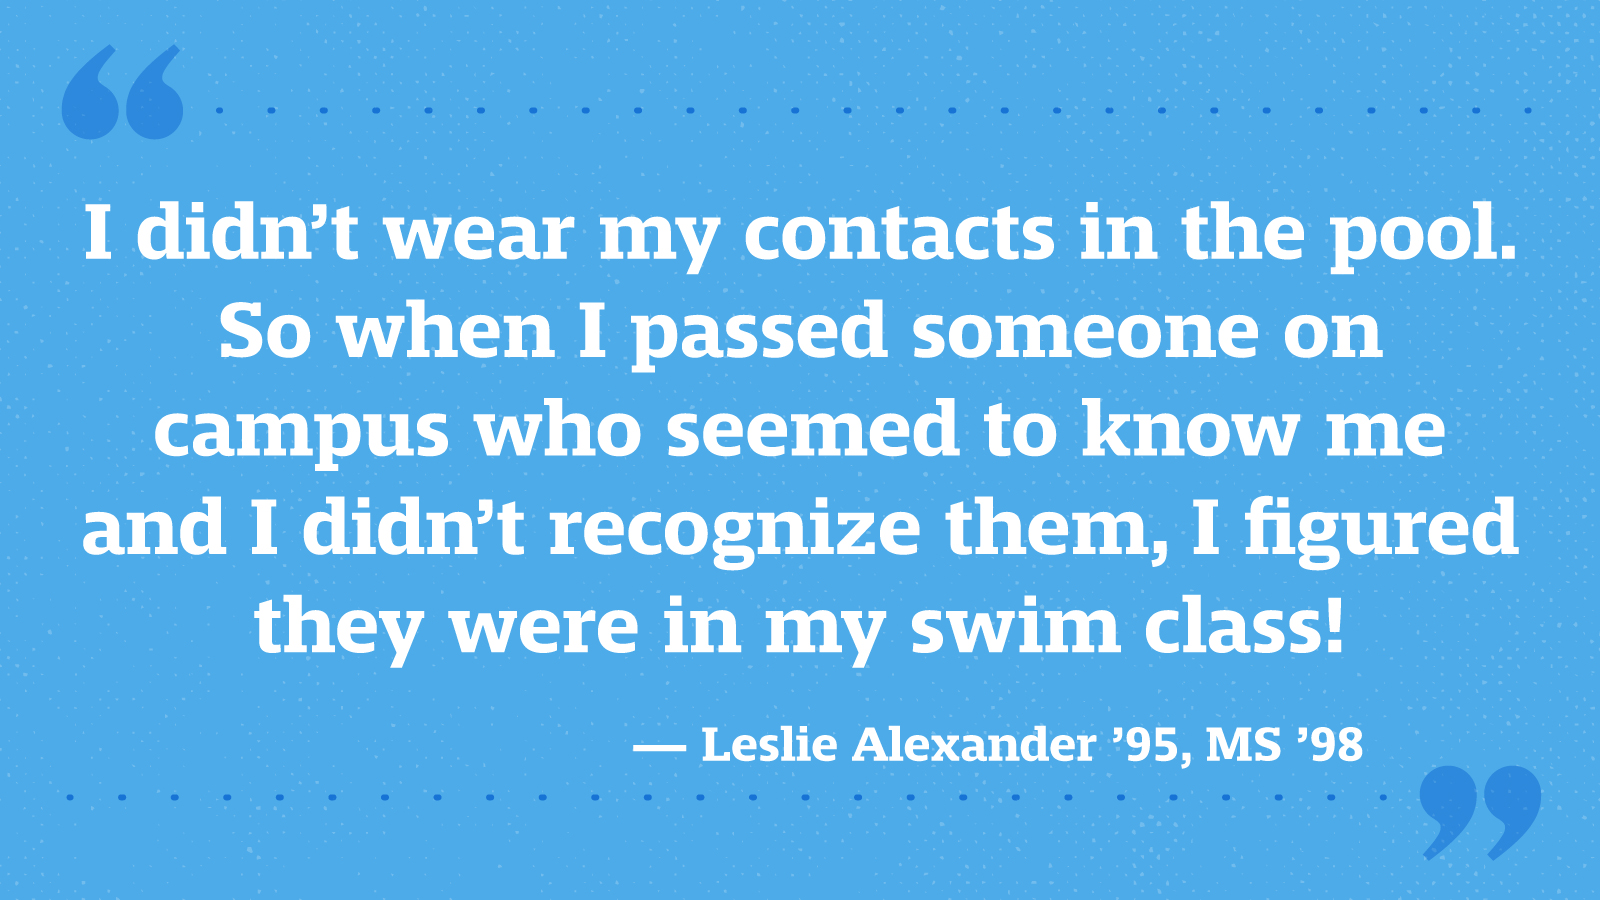 I didn’t wear my contacts in the pool. So when I passed someone on campus who seemed to know me and I didn’t recognize them, I figured they were in my swim class! — Leslie Alexander ’95, MS ’98